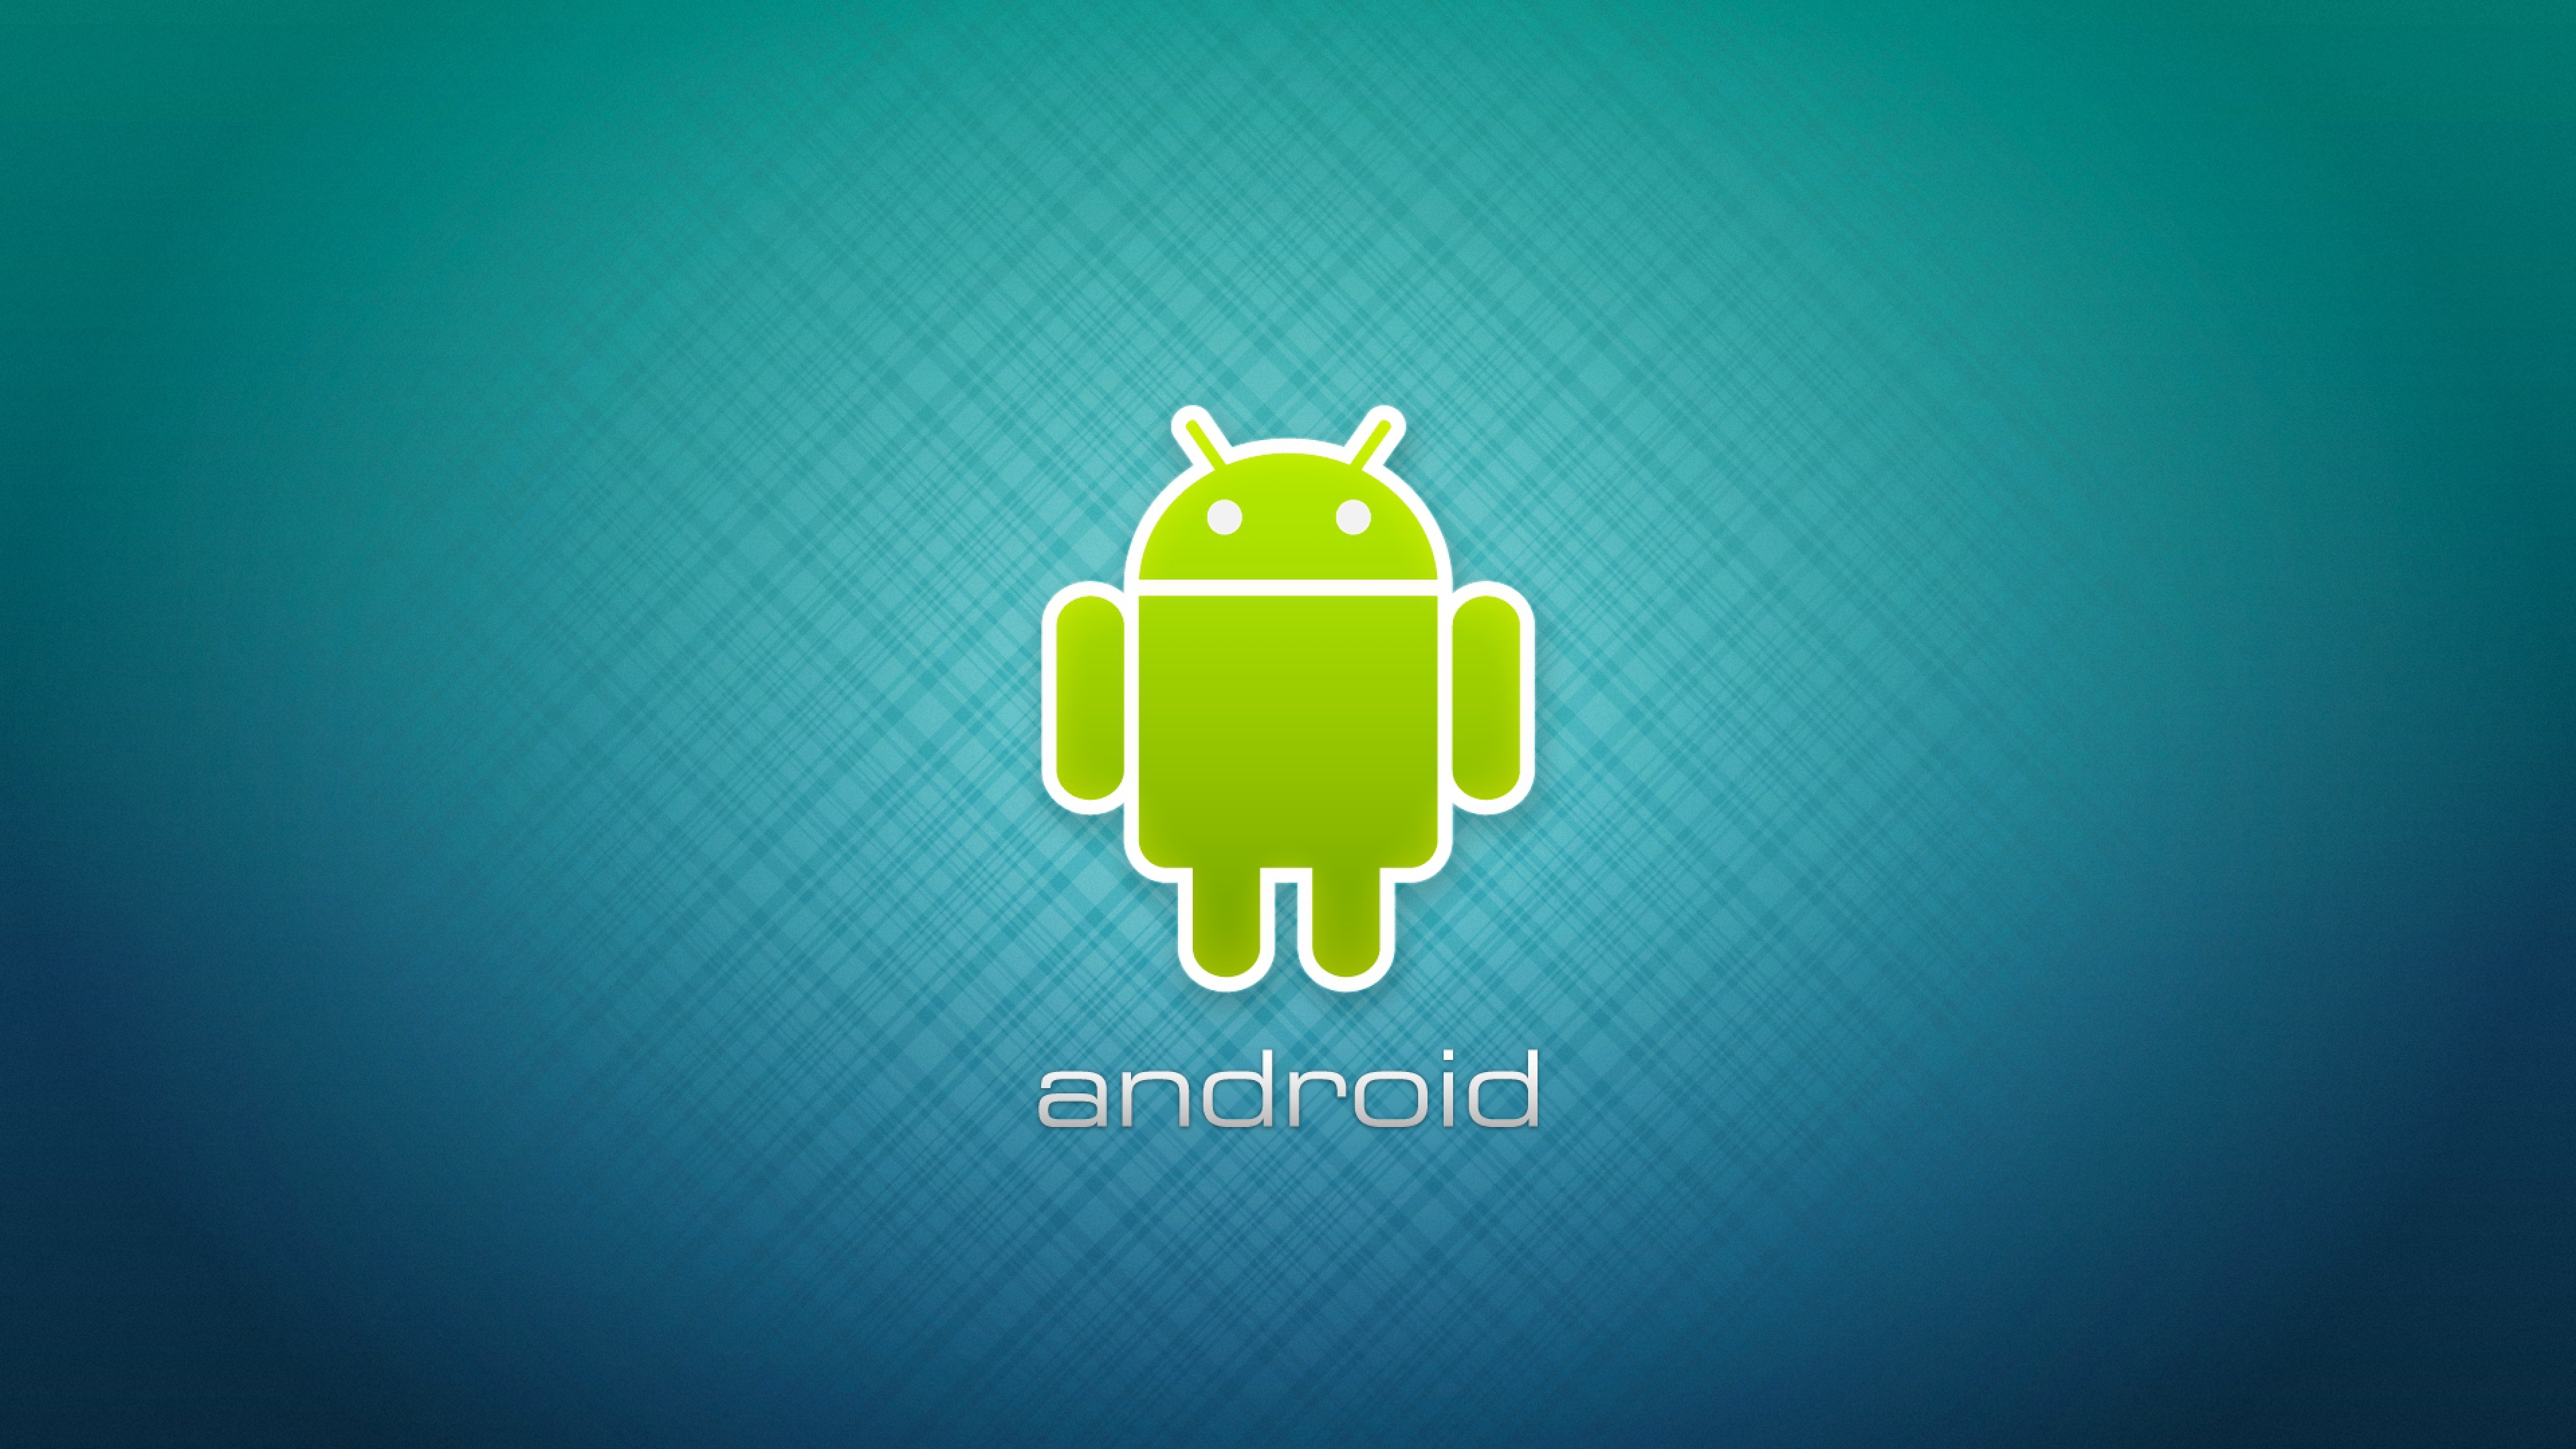 Wallpaper Android Robot Logotype 4k Ultra HD Background